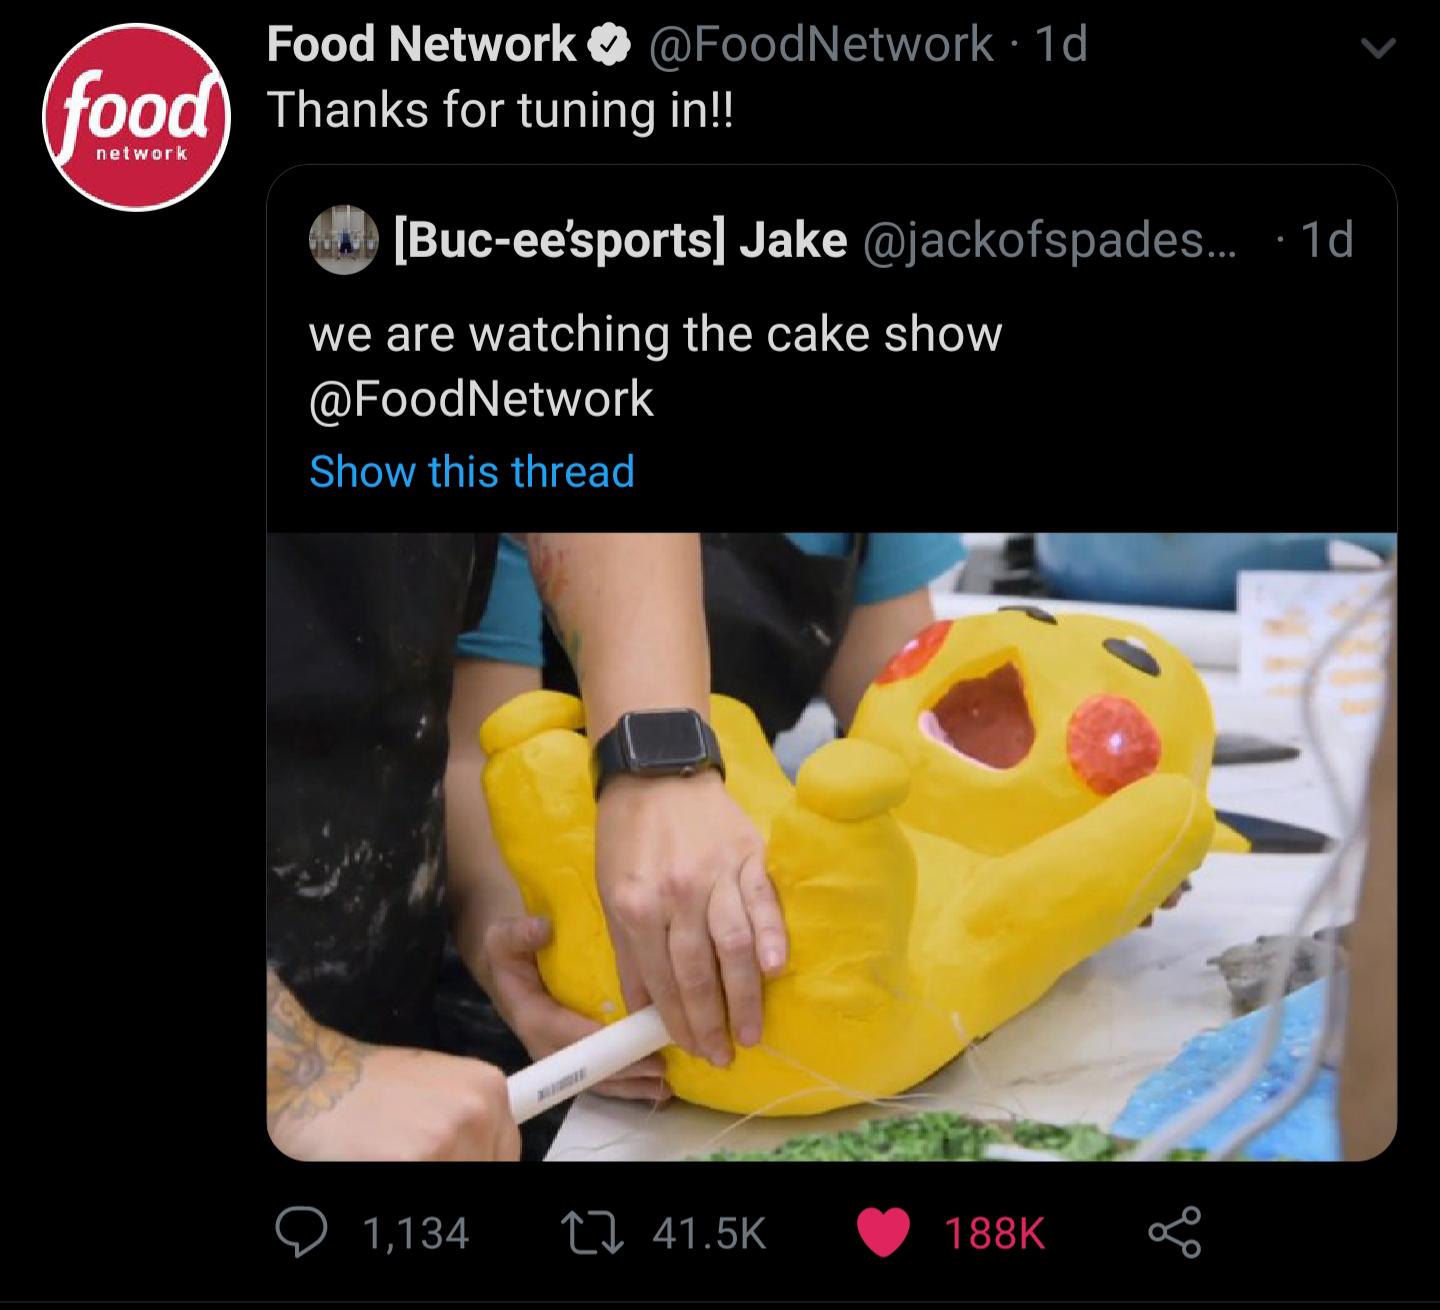 food network - Food Network . 1d food Thanks for tuning in!! network Bucee'sports Jake ....10 we are watching the cake show Show this thread 1,134 22